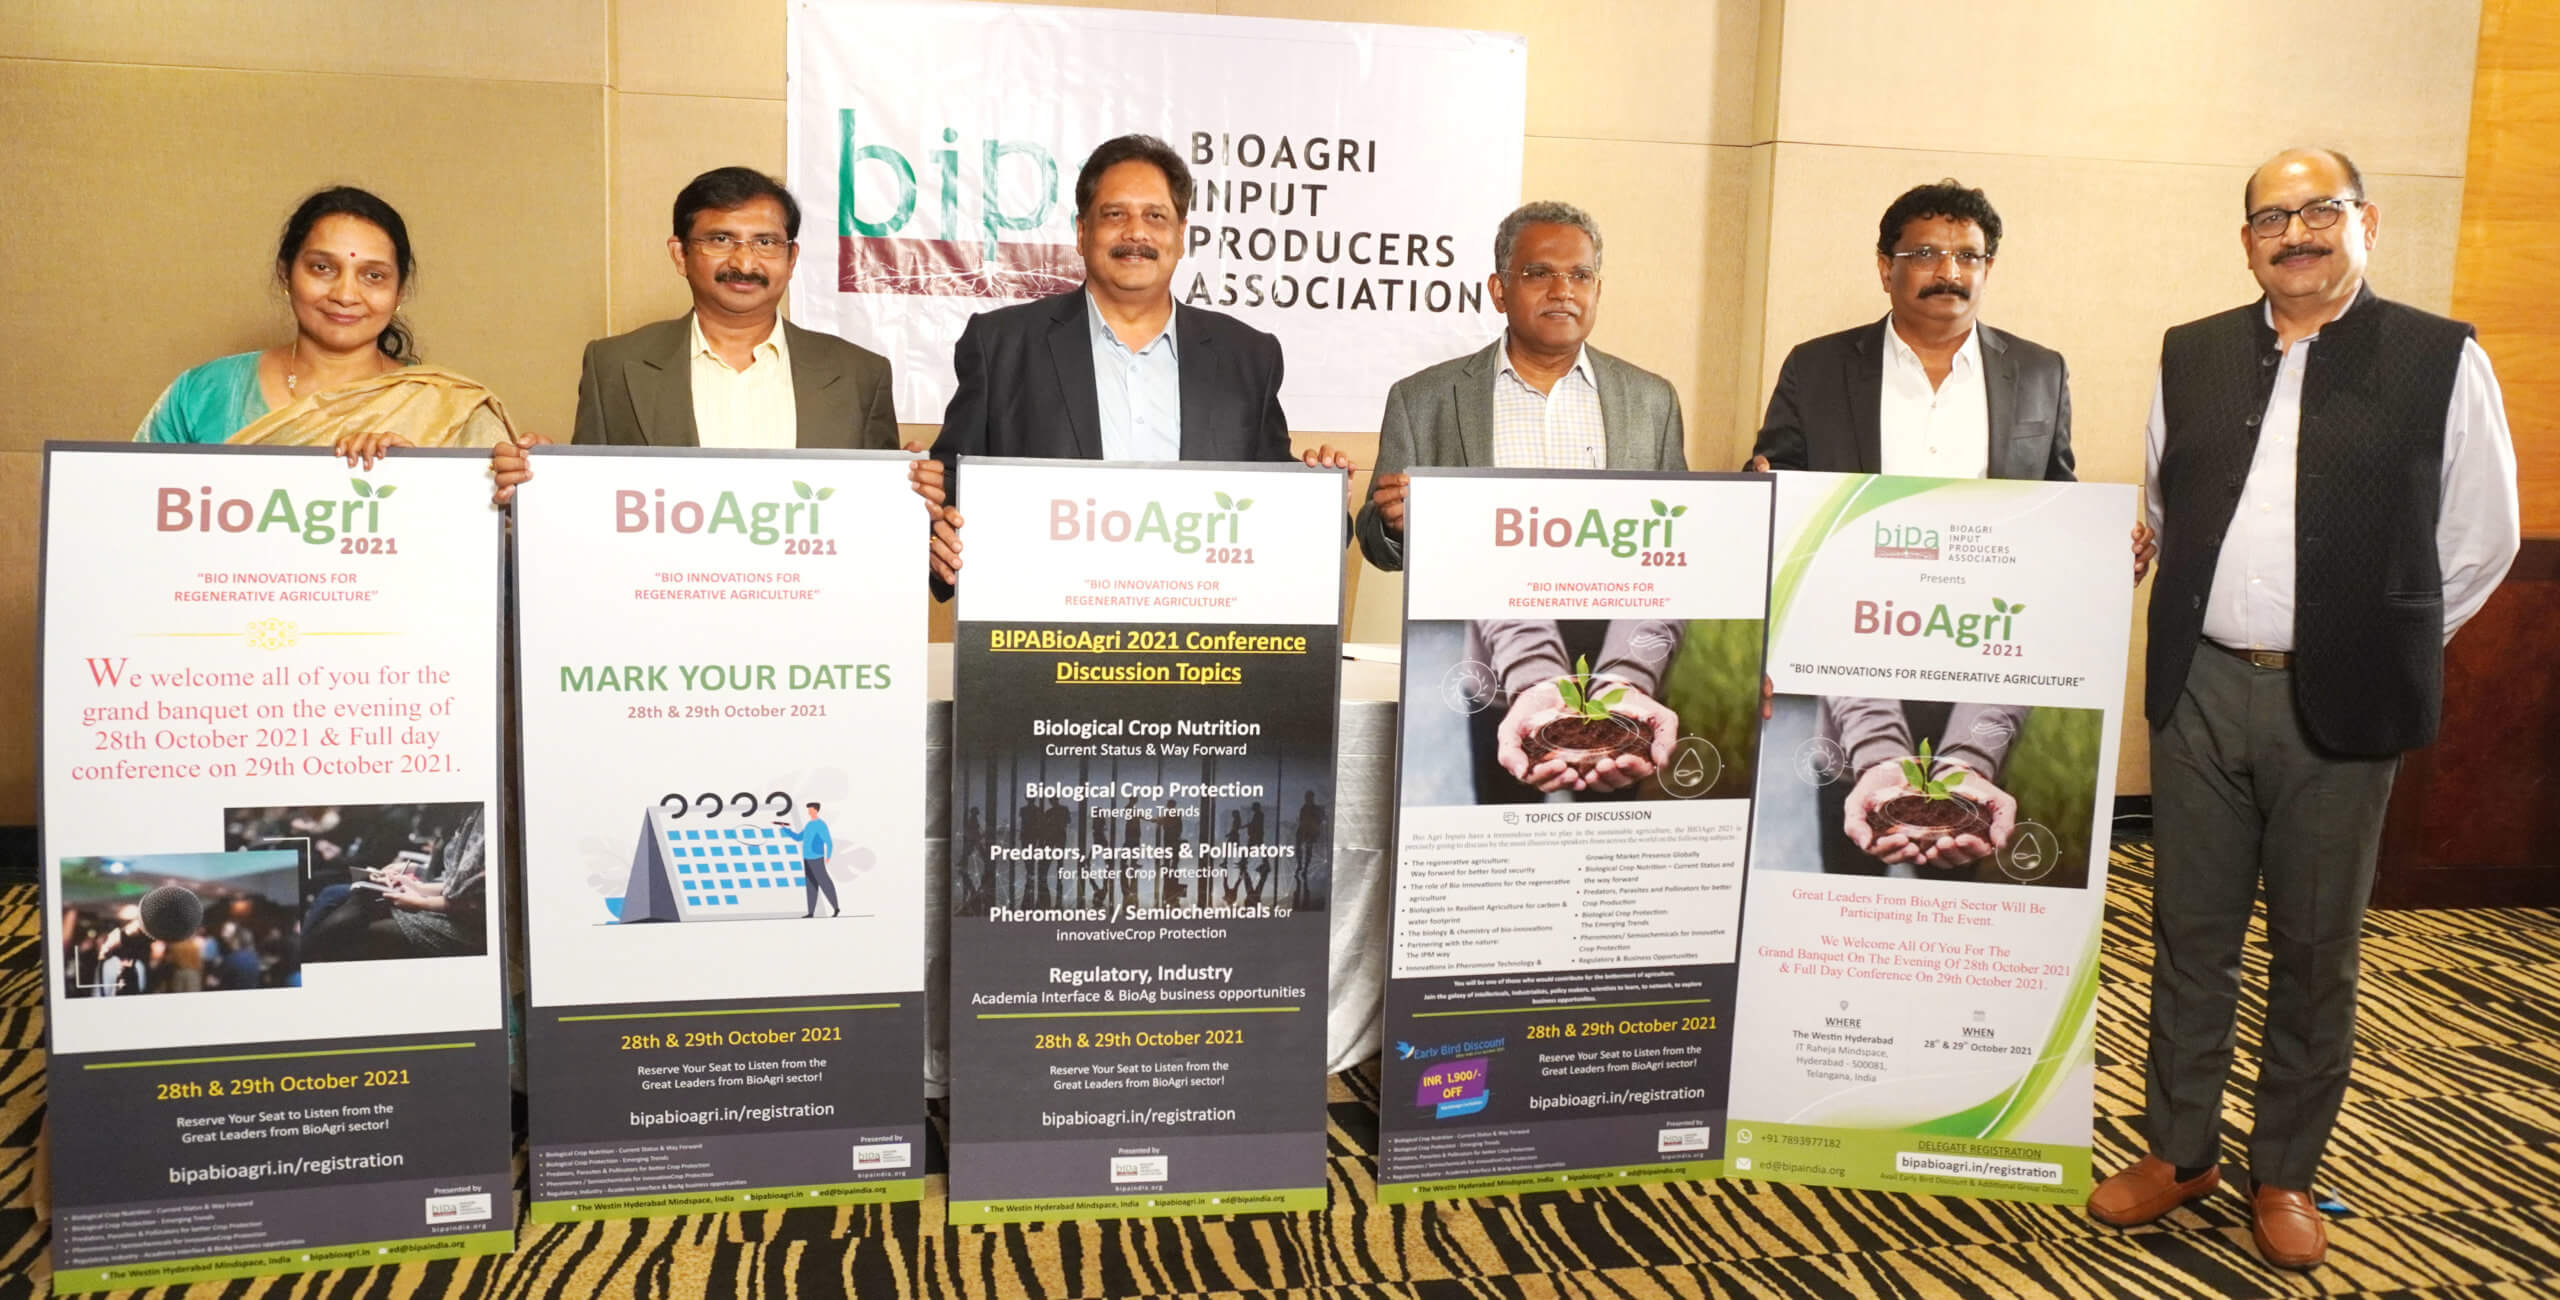 The biggest ever Bio-Agri conference in India will be held in Hyderabad on 28th and 29th October